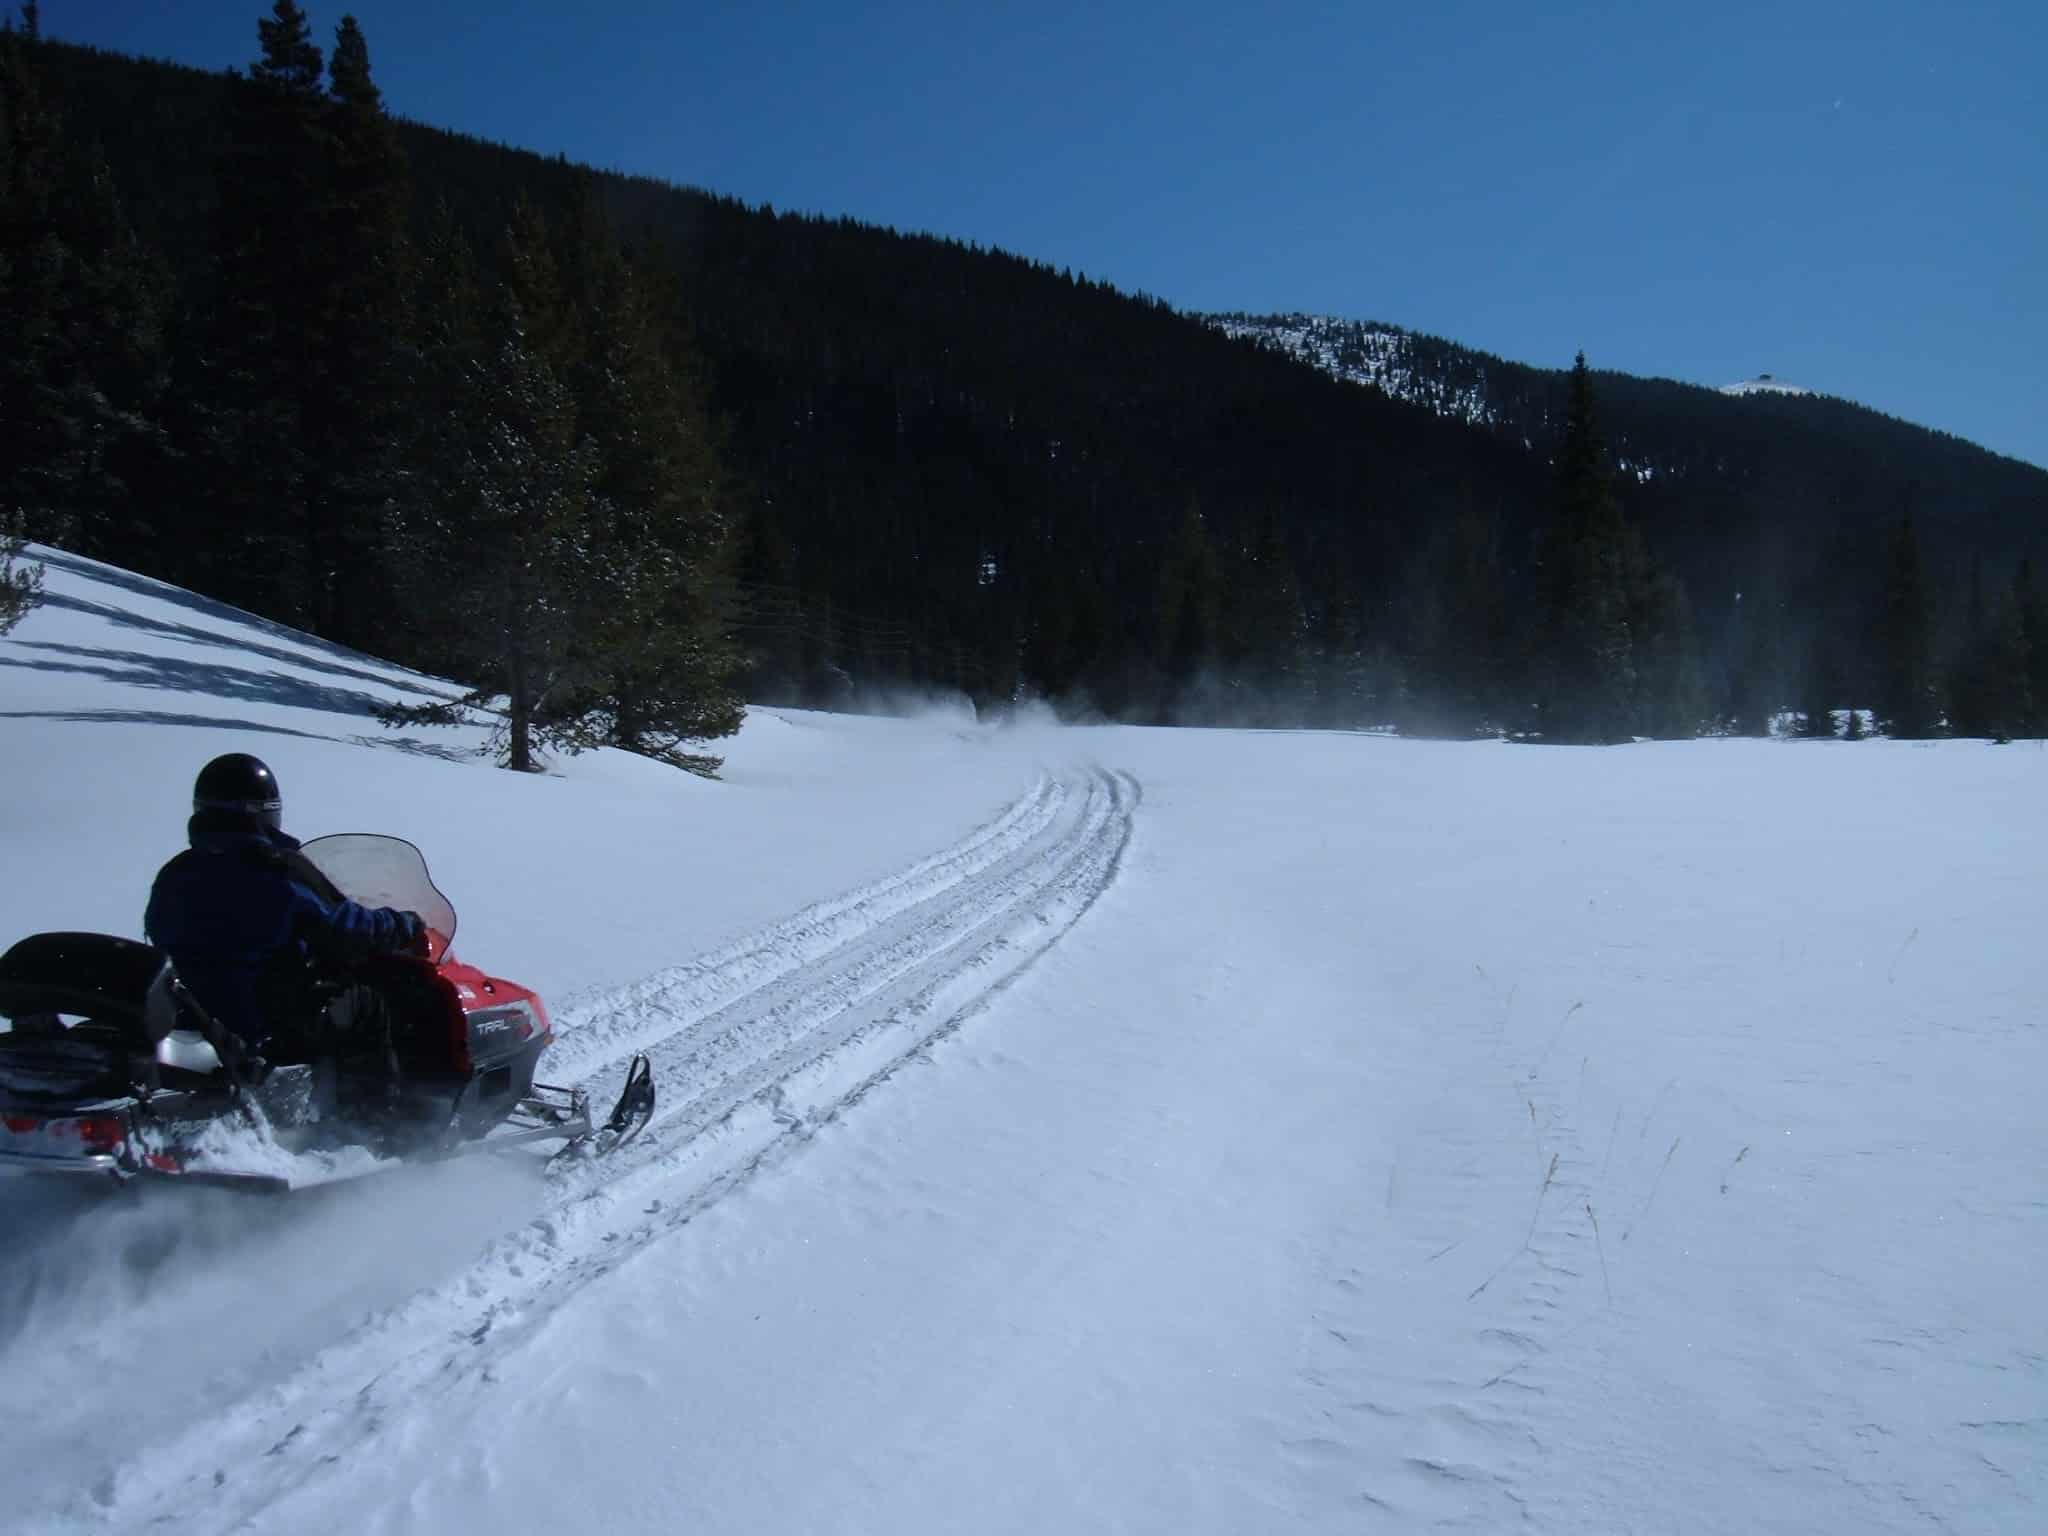 Snowmobiling on a packed trail in the open field.